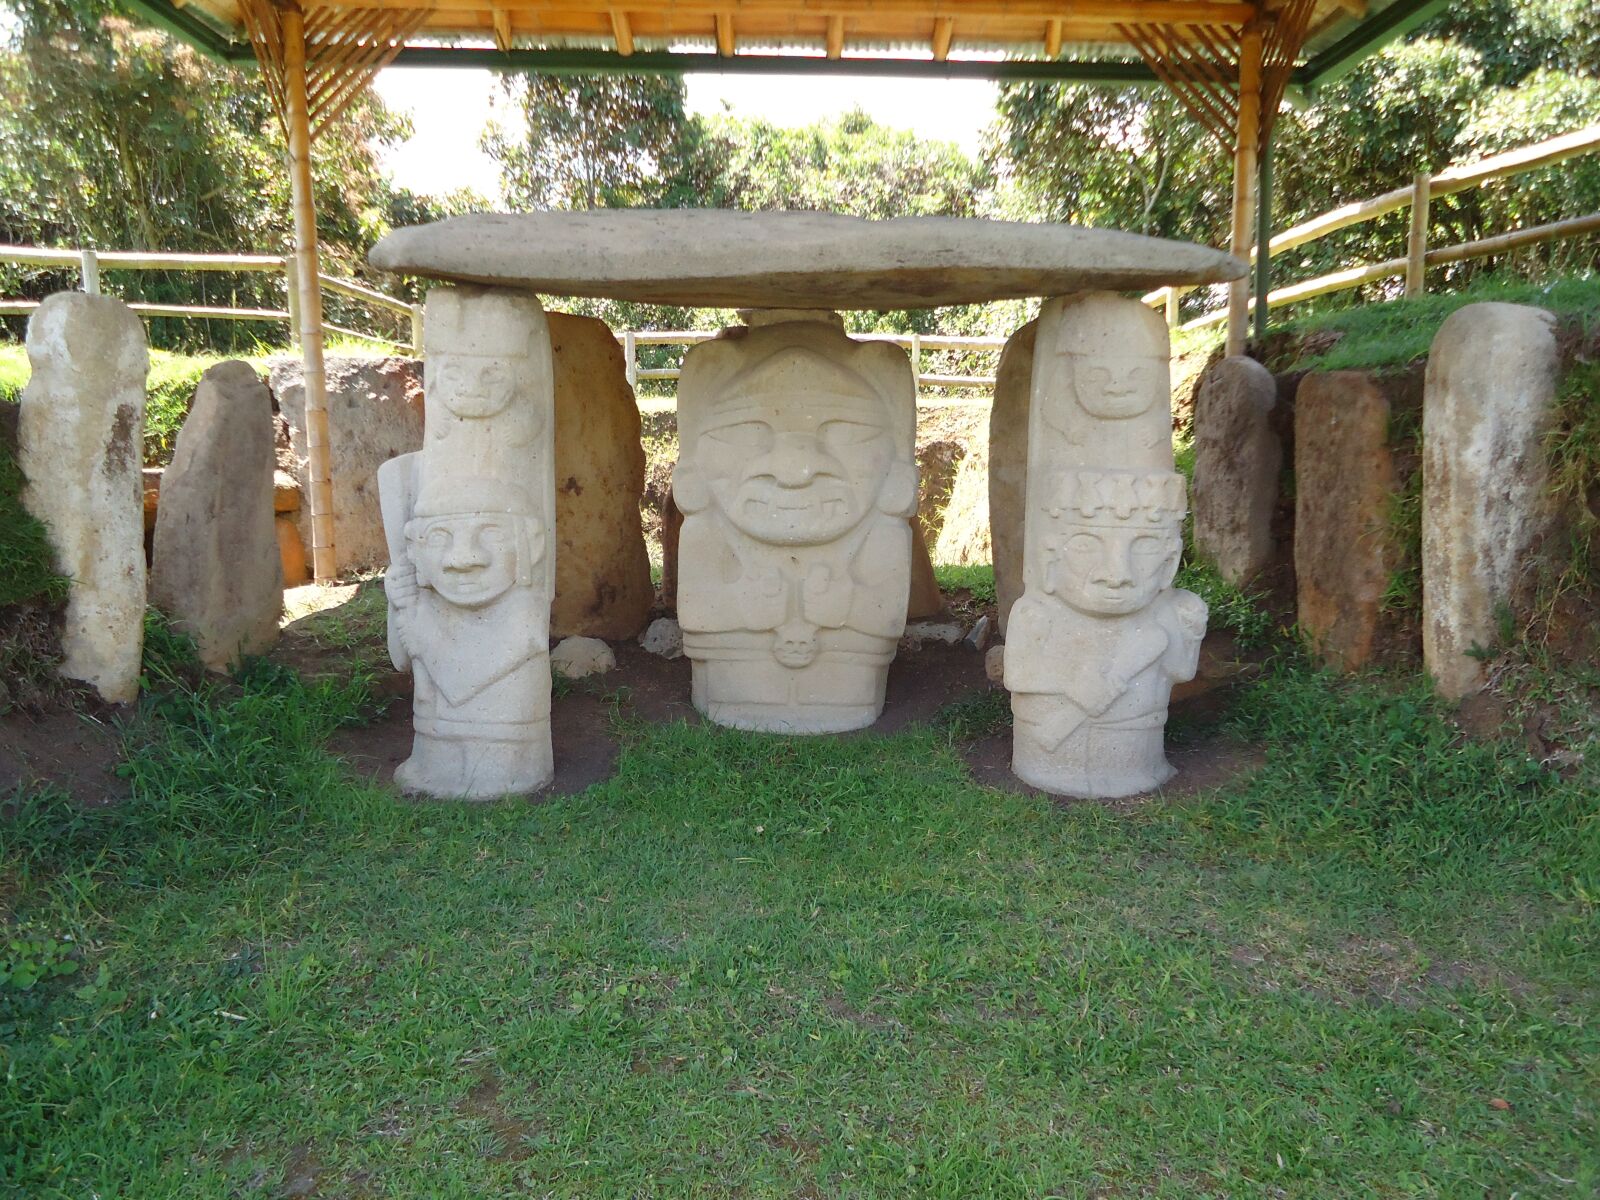 Sony Cyber-shot DSC-W610 sample photo. Archaeological, indigenous, statue photography